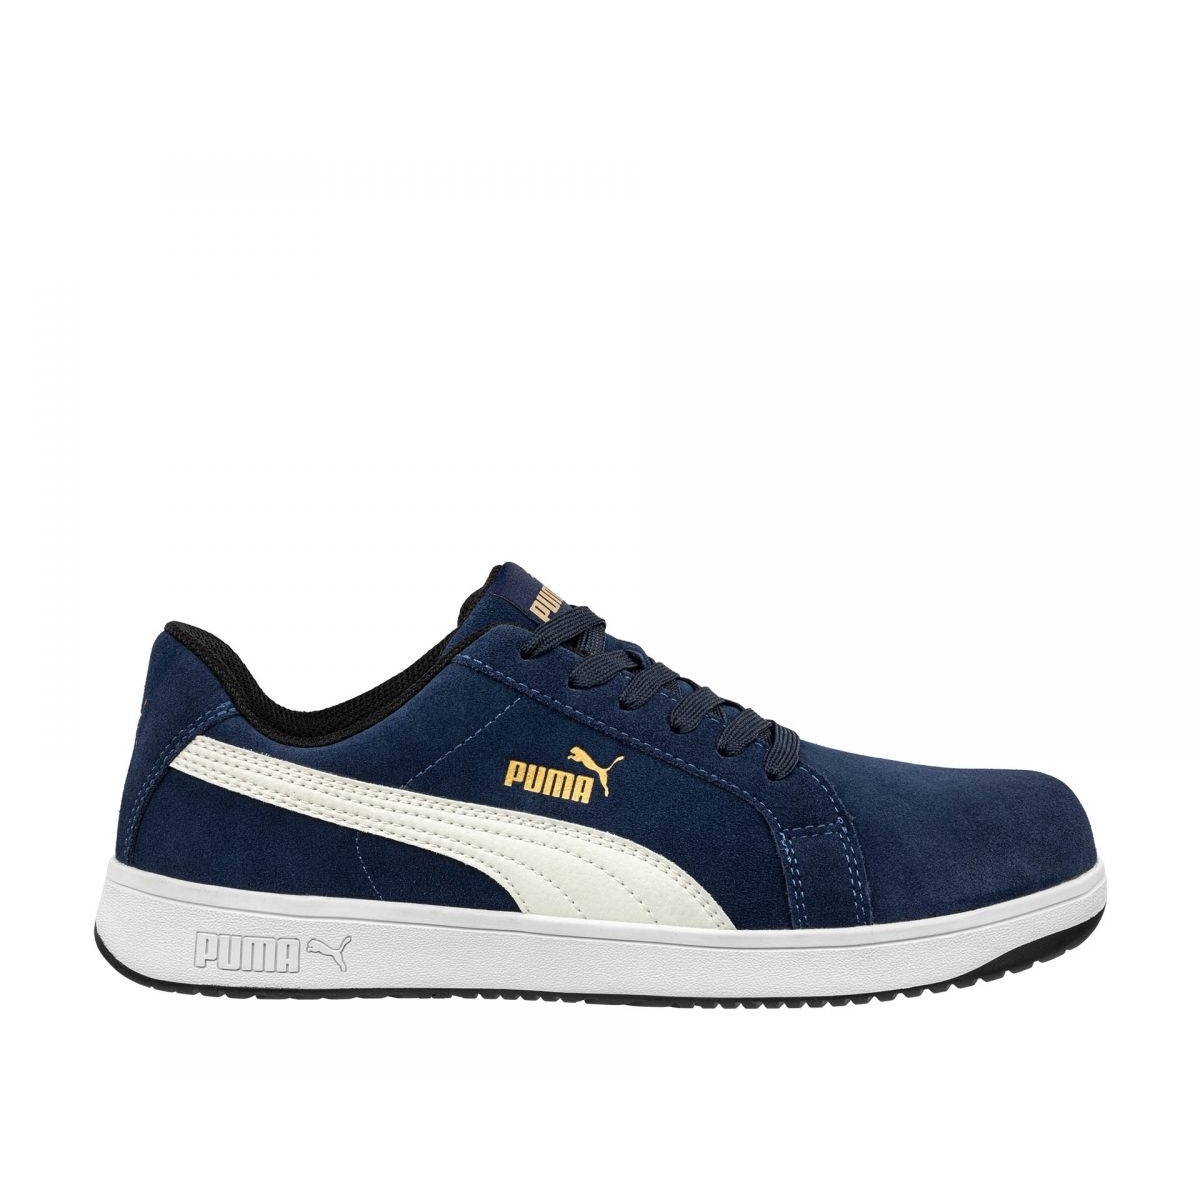 PUMA Safety Men's Iconic Low Composite Toe EH Work Shoes Navy Suede - 640025 ONE SIZE Navy - Navy, 10